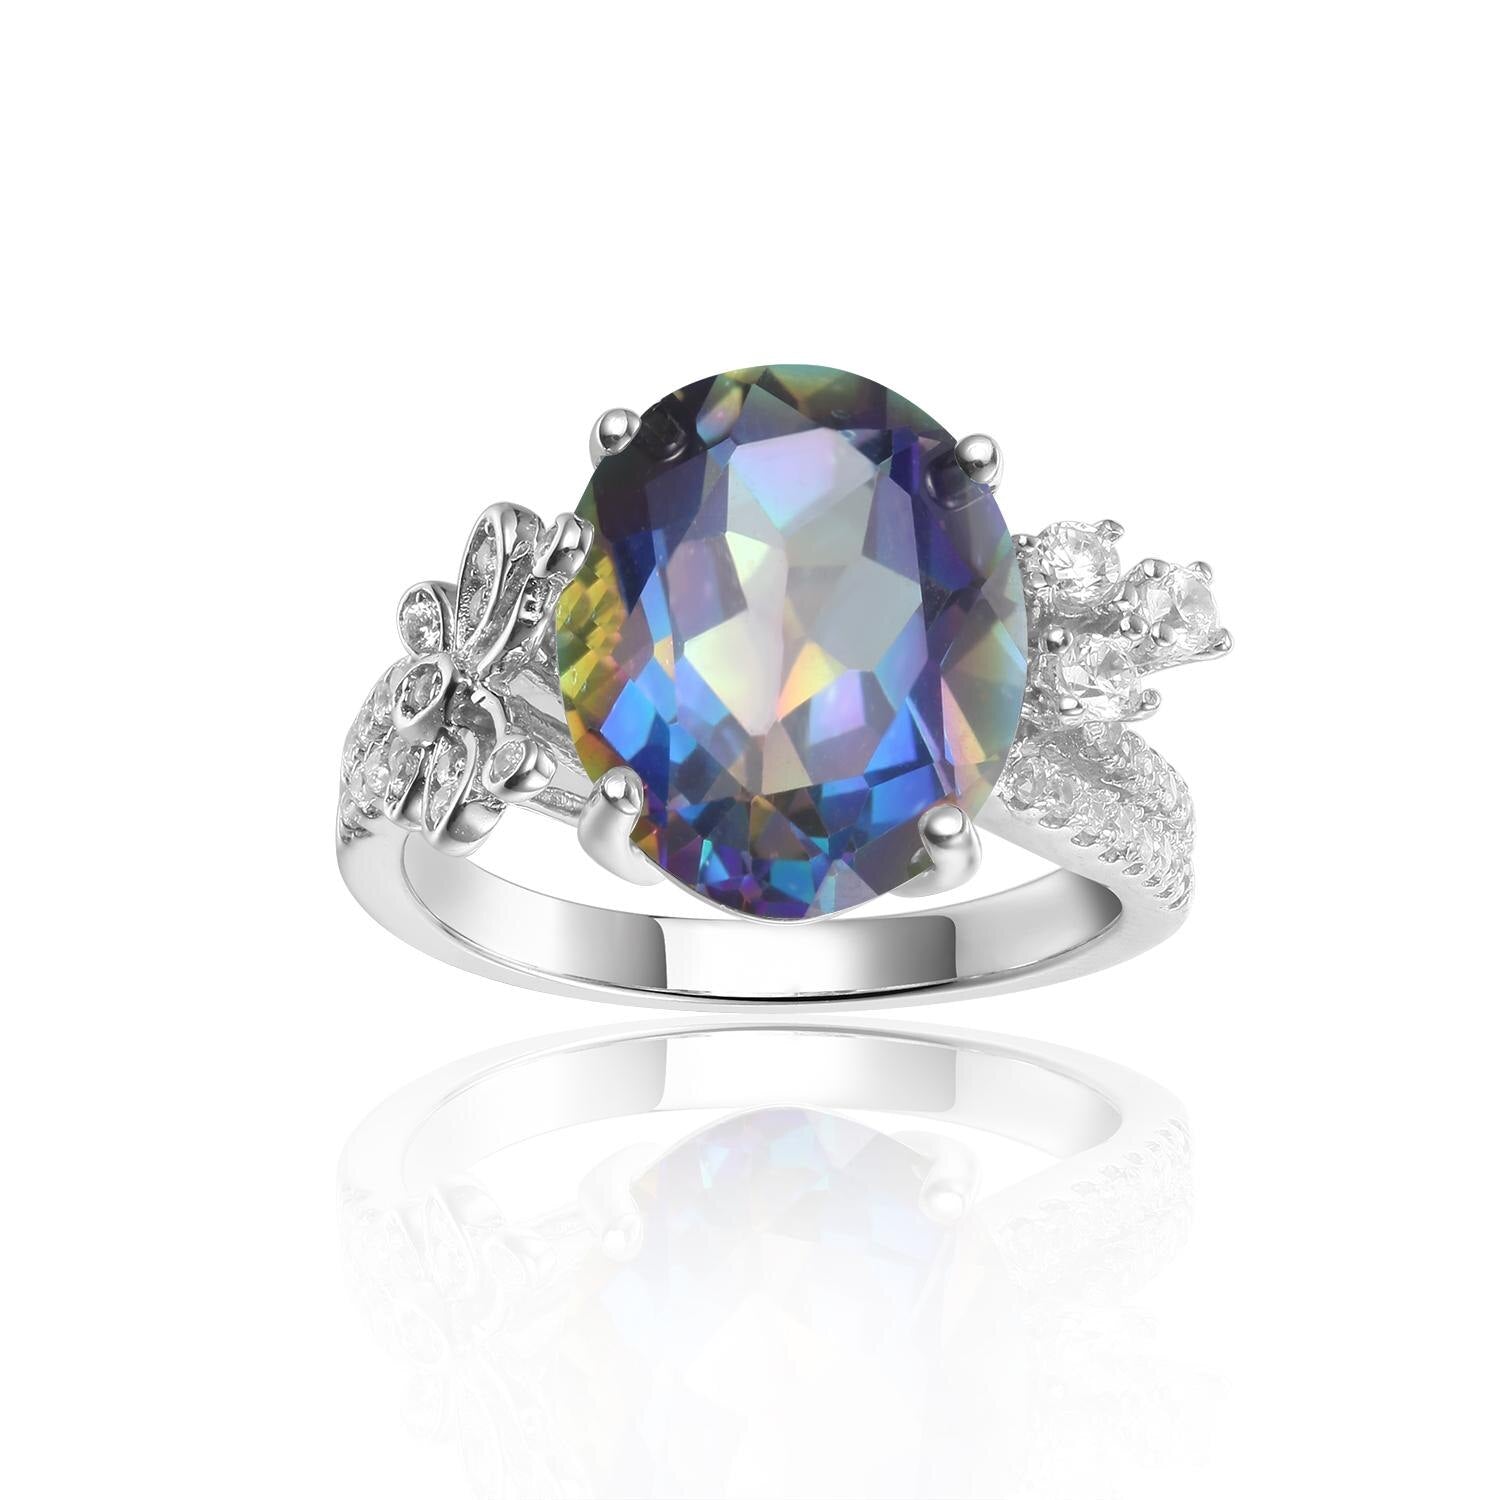 GEM&#39;S BALLET 4.36Ct 10x12mm Rainbow Mystic Topaz Gemstone Antique Art Rings in Sterling Silver with Laurel Leaves Gift For Her Blueish|925 Sterling Silver